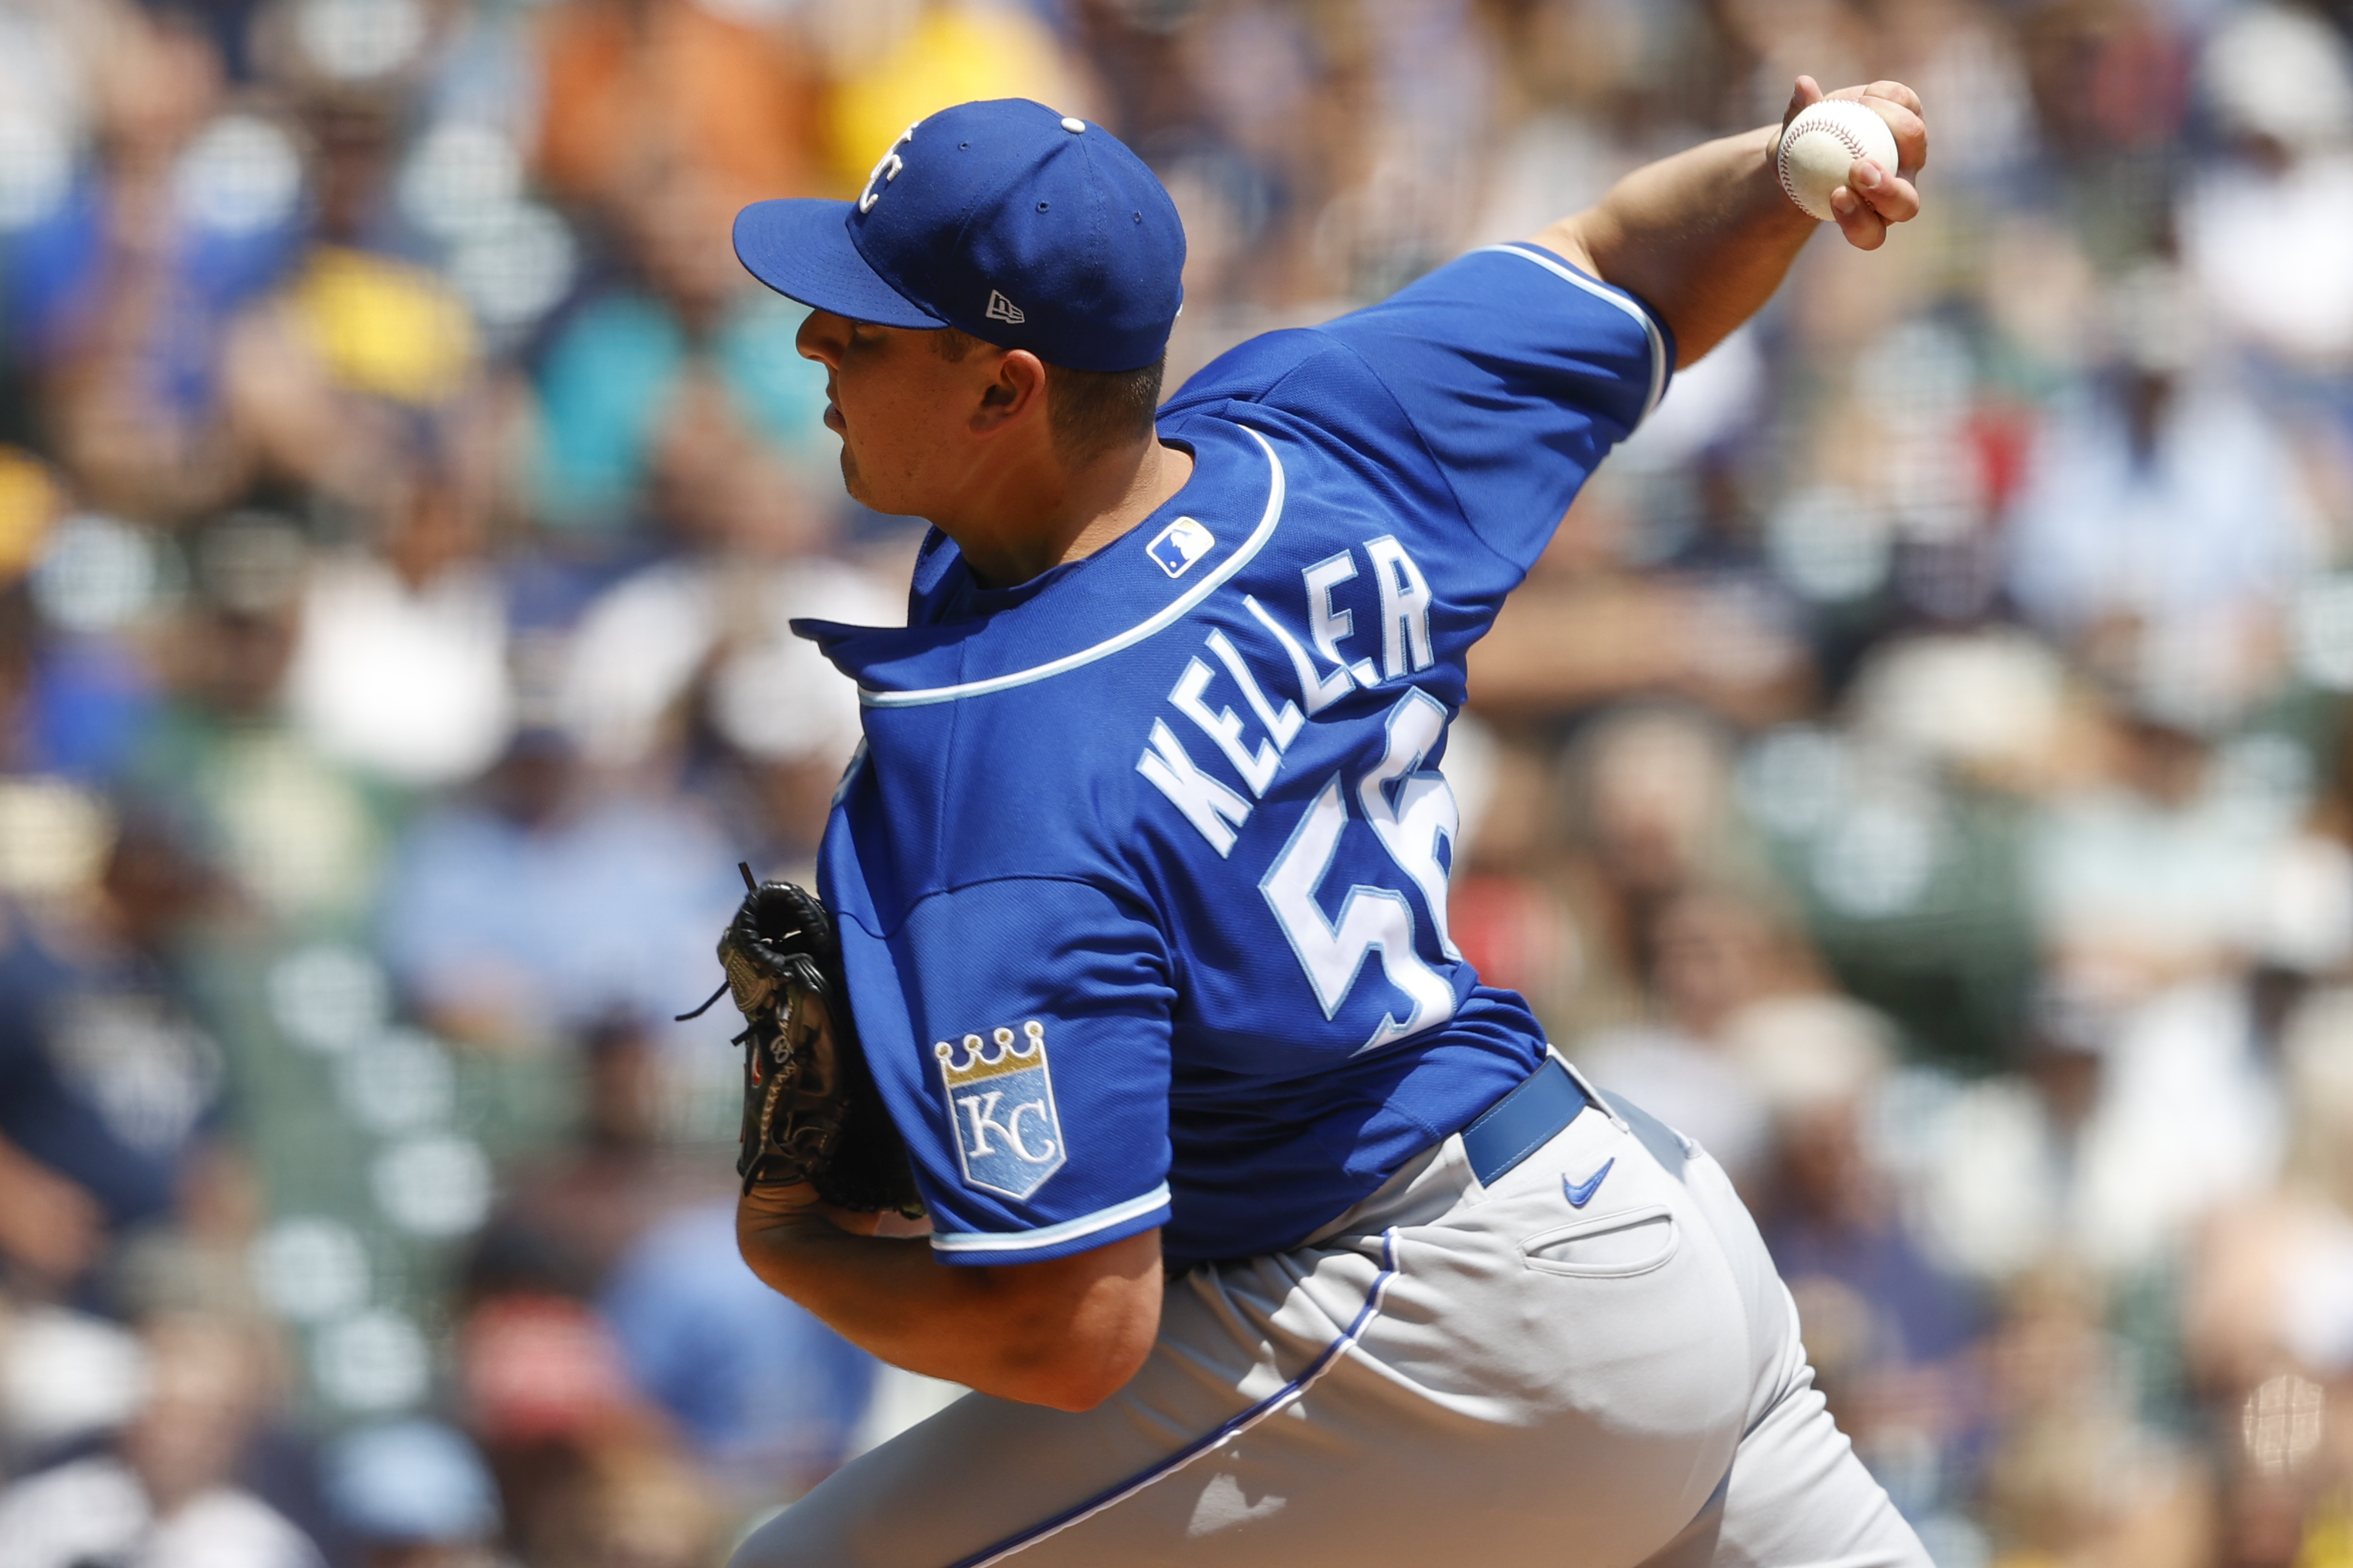 Keller, Royals complete season sweep of Brewers with win